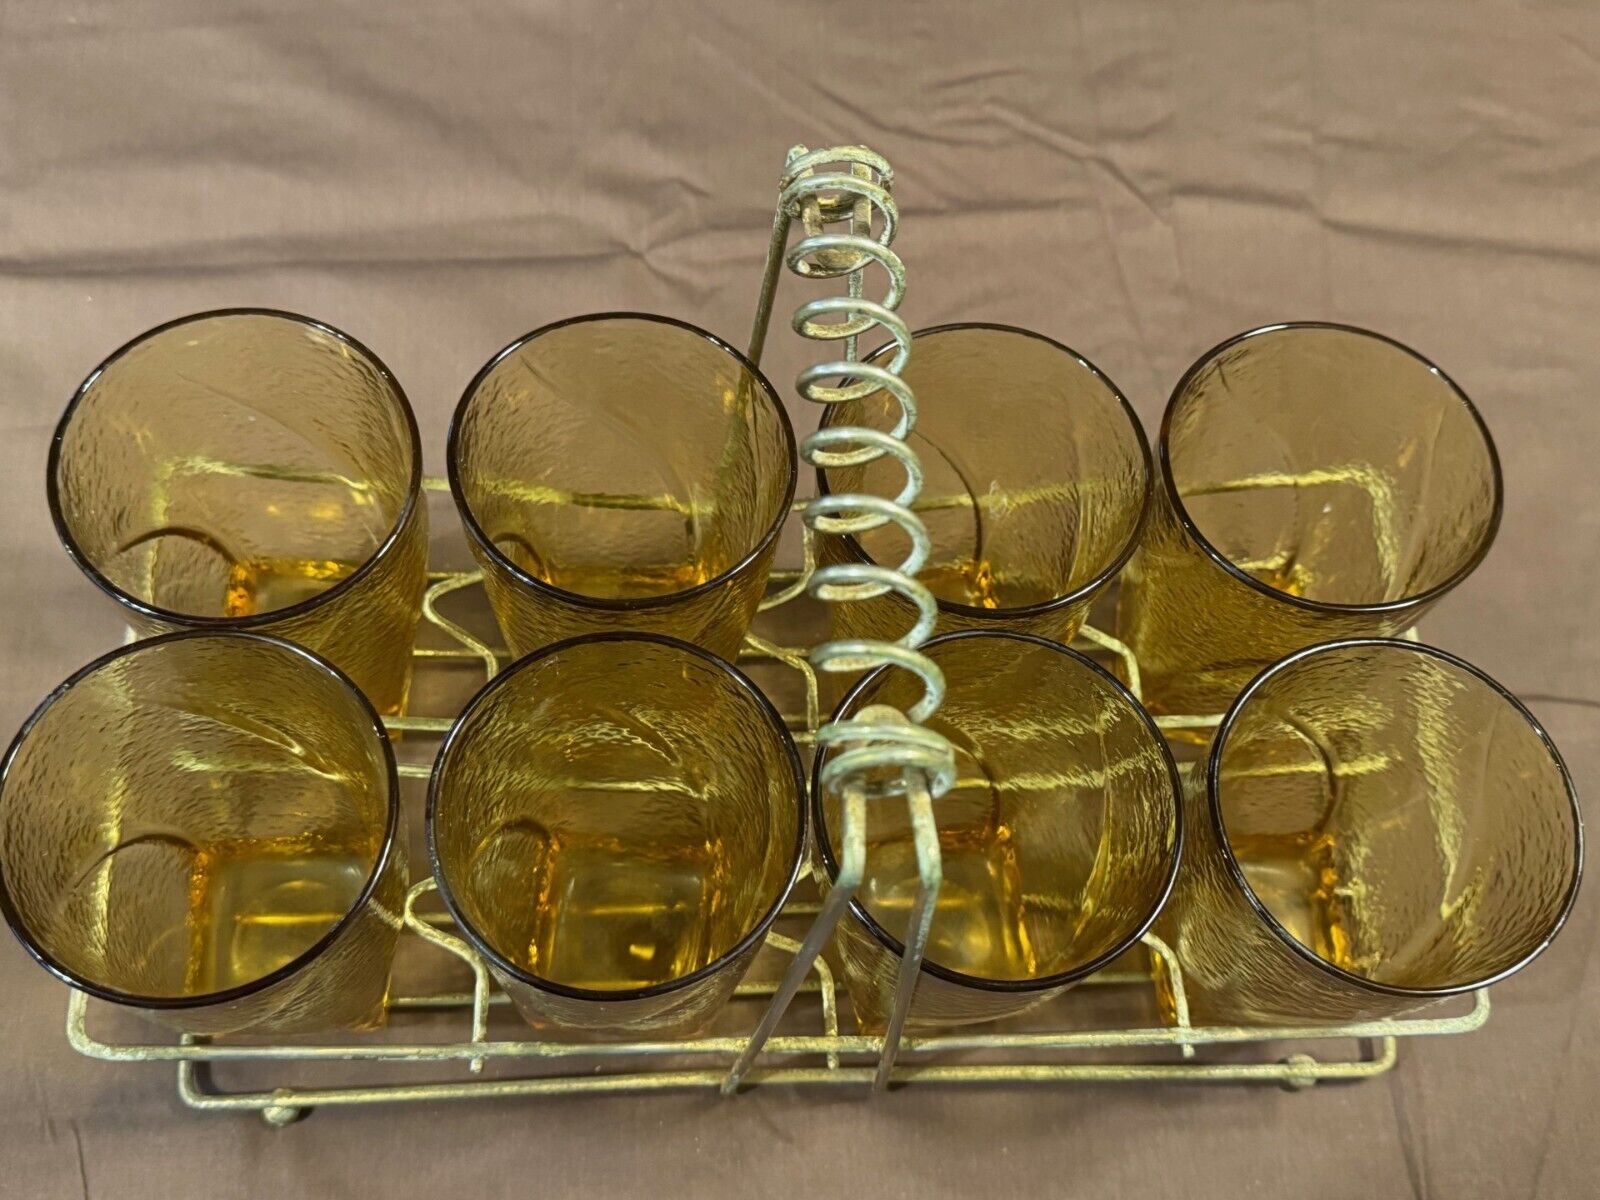 Vintage antique mid-century modern MCM Gold 8 glass set with caddy